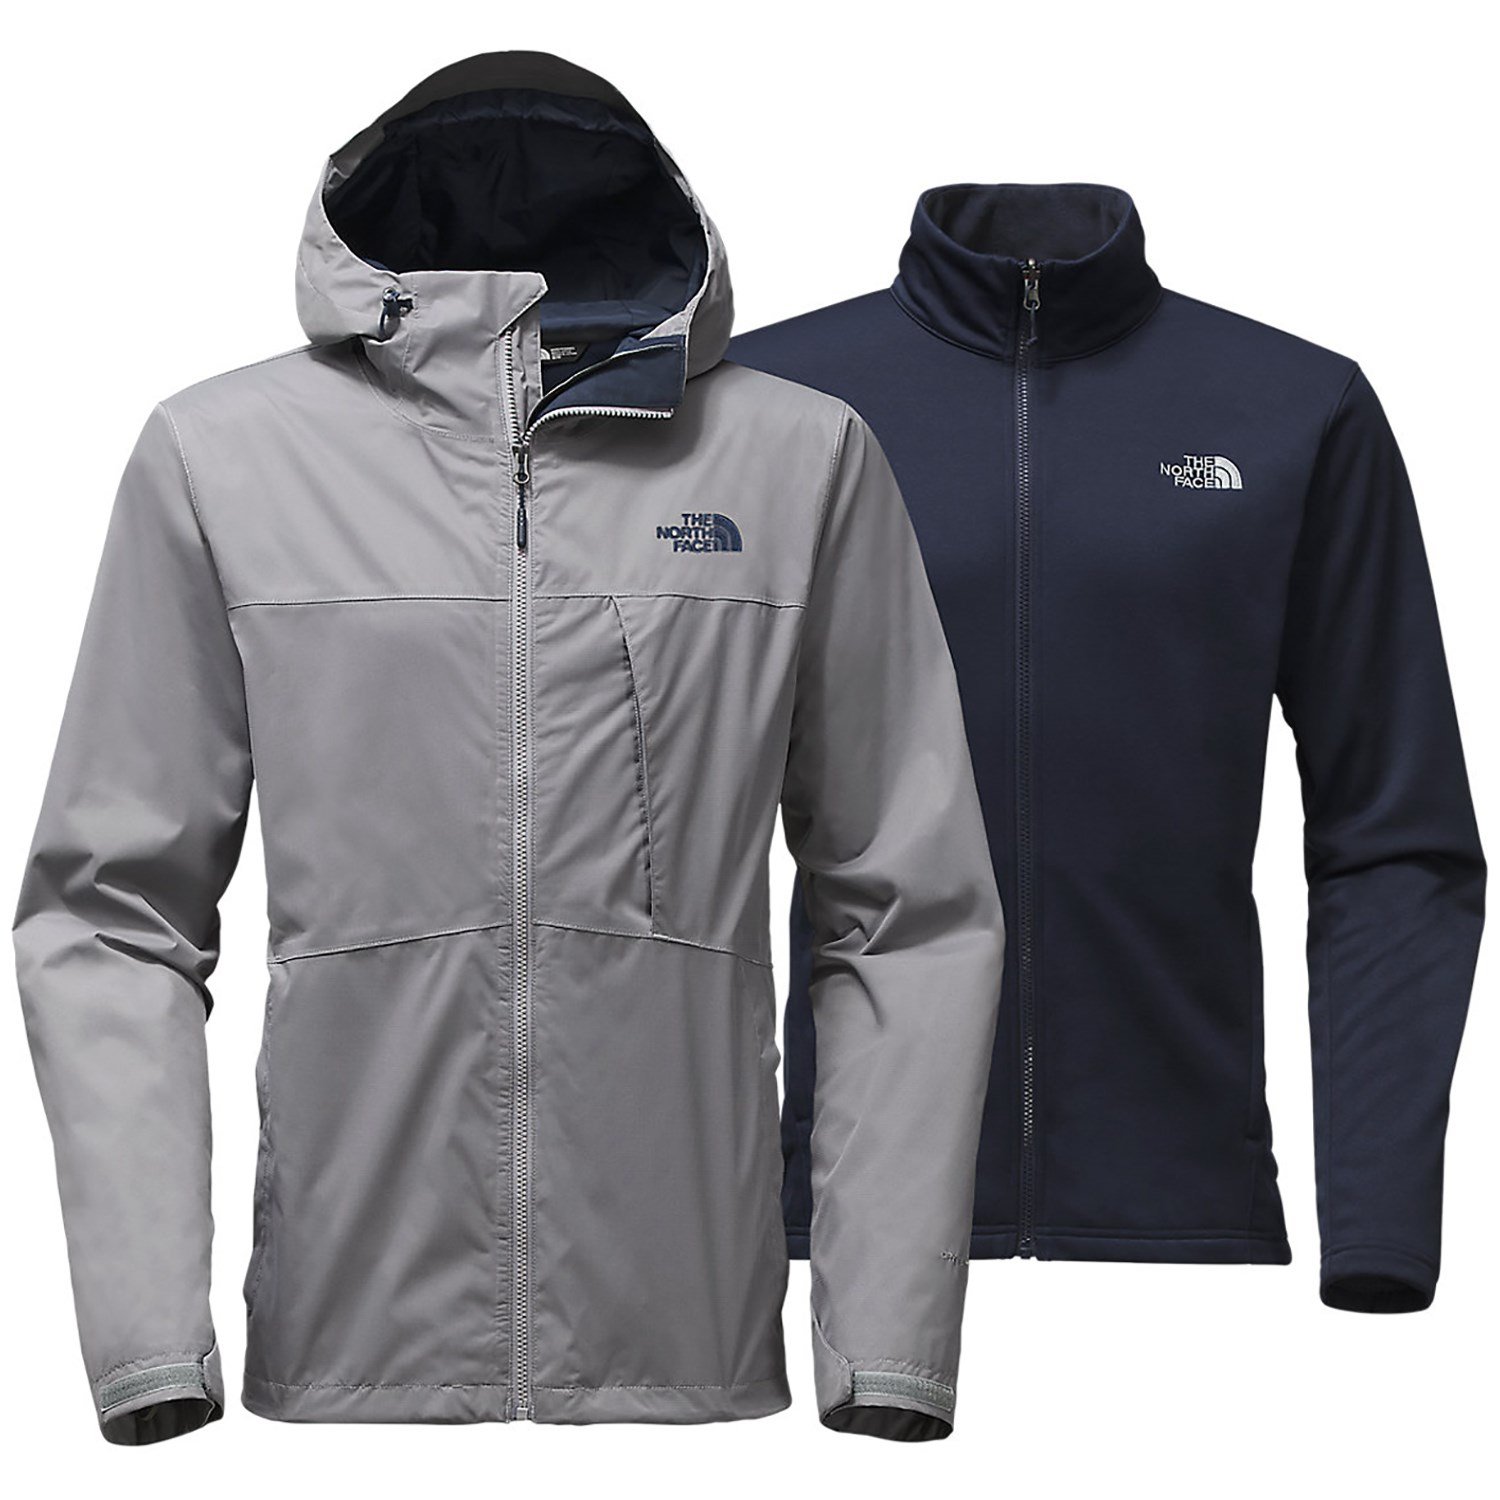 north face arrowood triclimate jacket